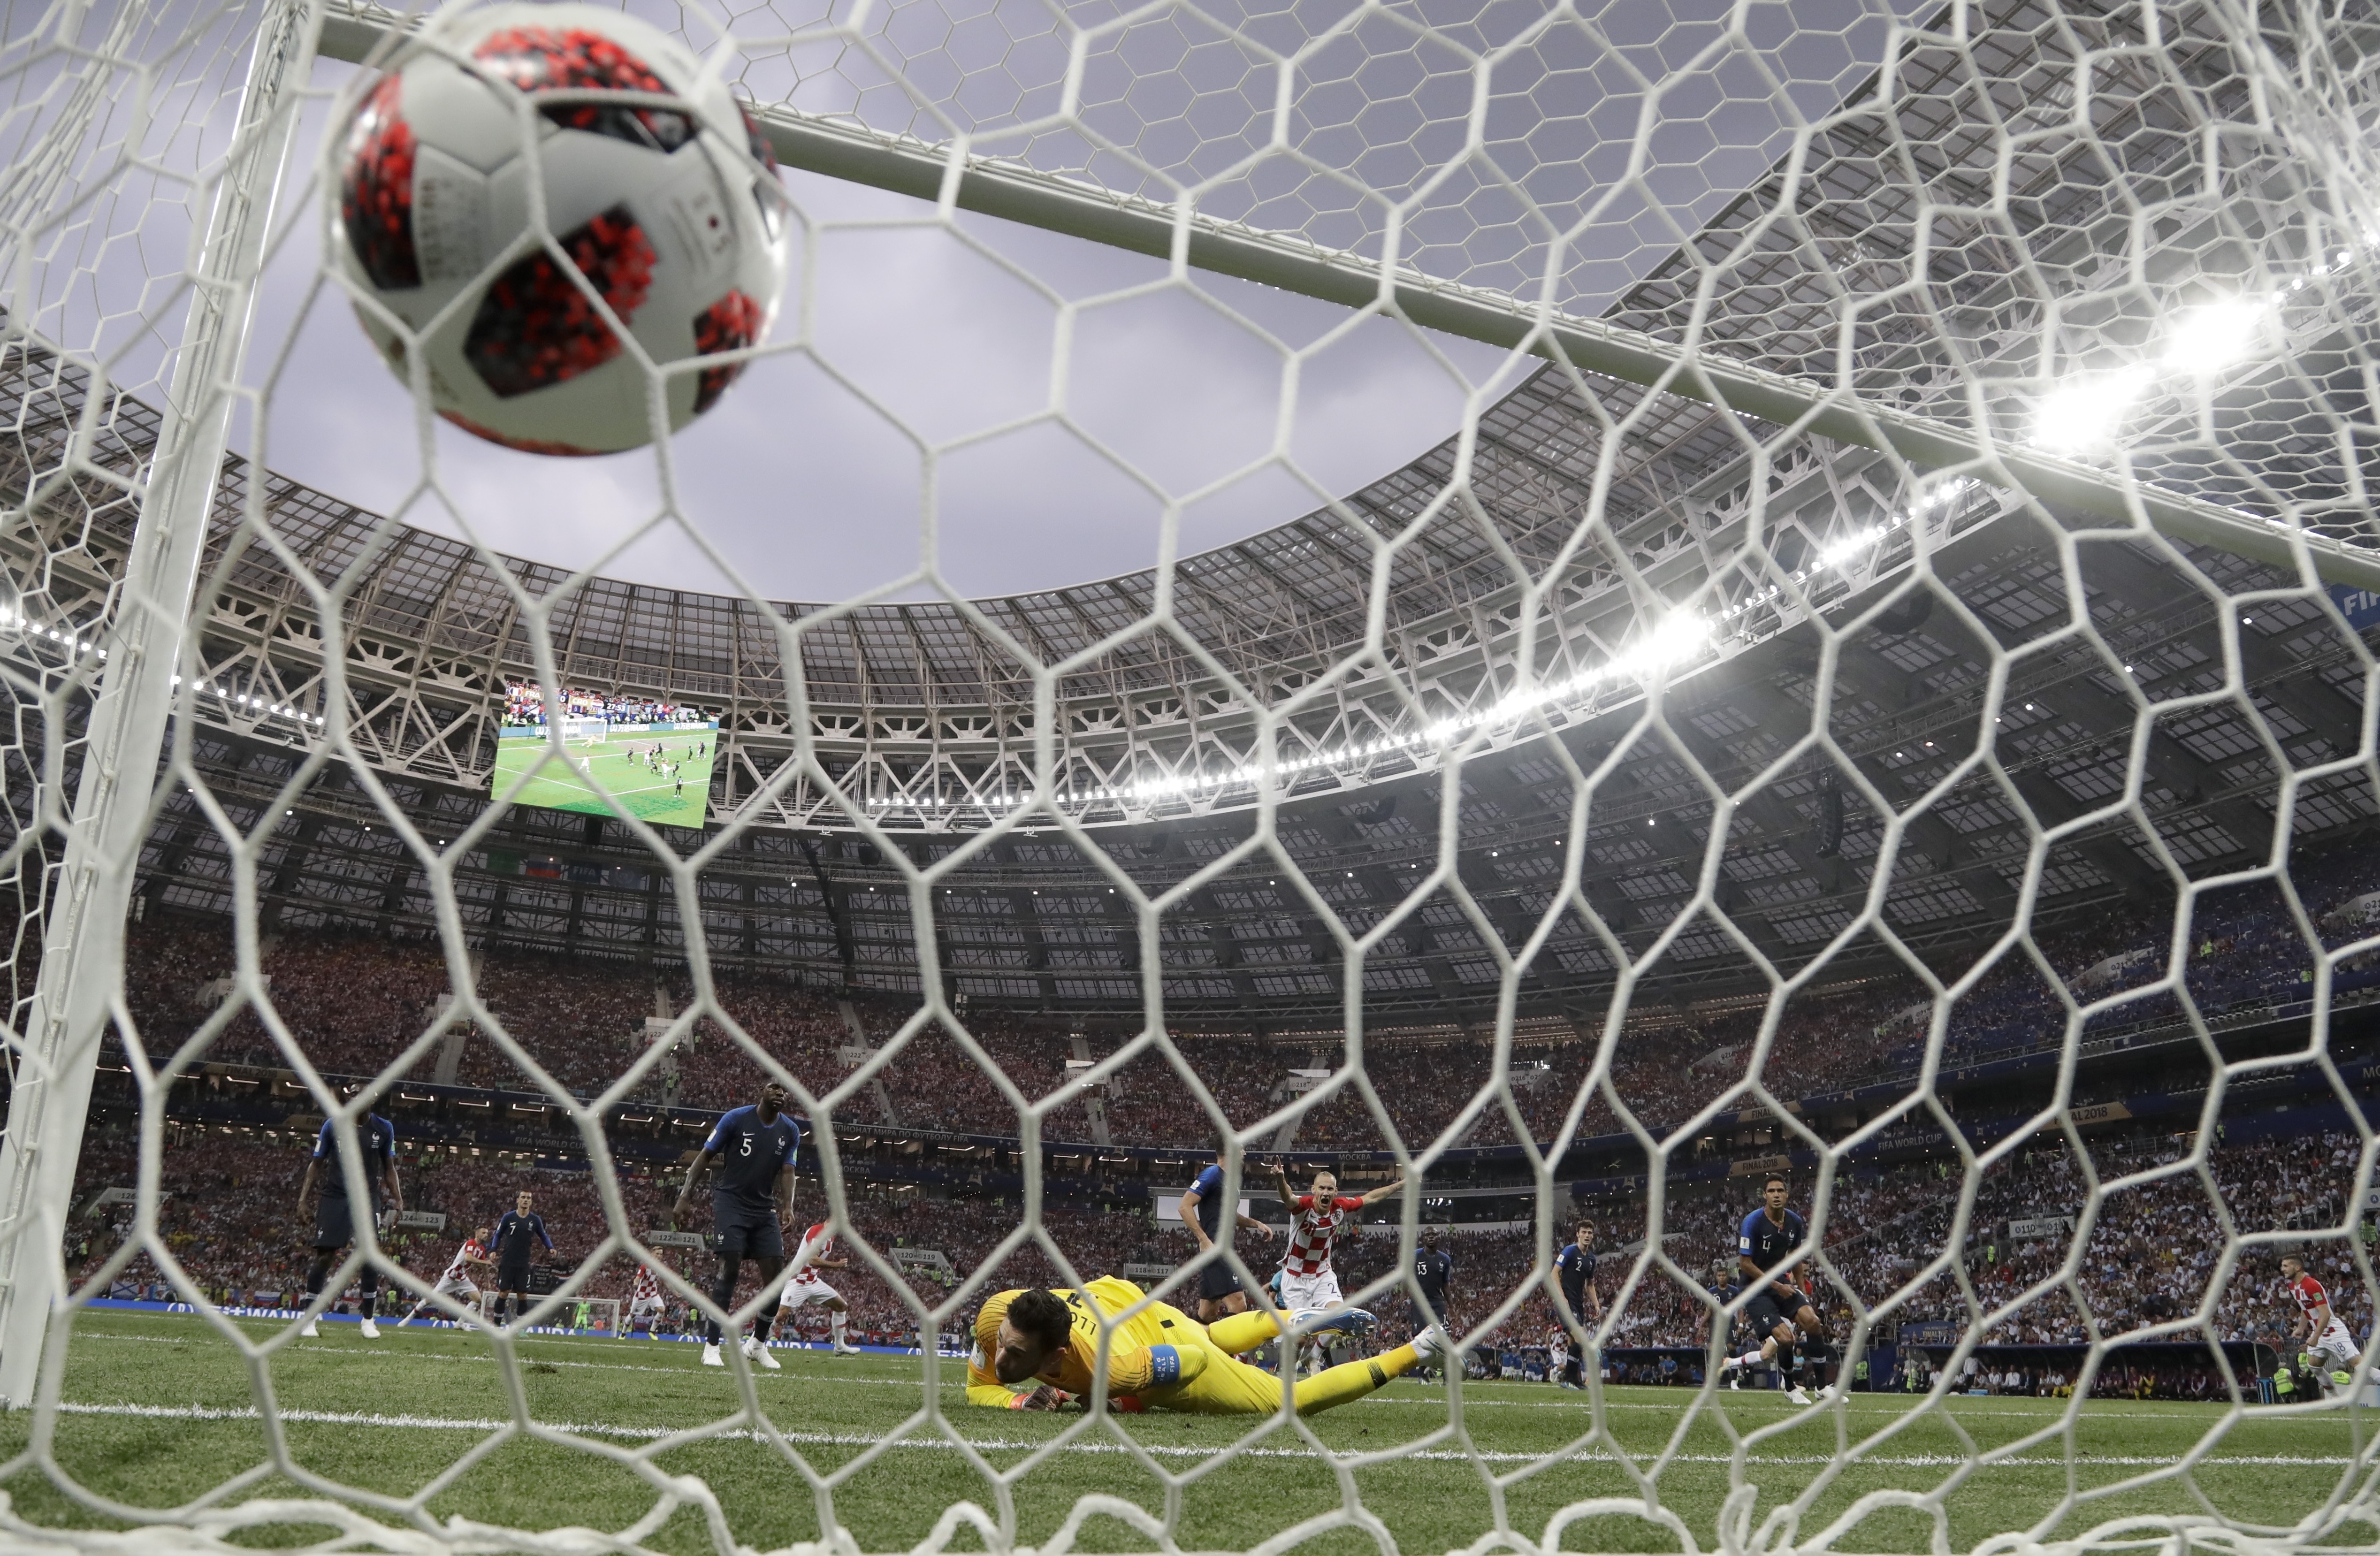 France goalkeeper Hugo Lloris looks at the ball as Croatia's Ivan Perisic scores his side's opening goal, during the final match between France and Croatia at the 2018 soccer World Cup in the Luzhniki Stadium in Moscow, Russia, Sunday, July 15, 2018. (AP Photo/Petr David Josek)